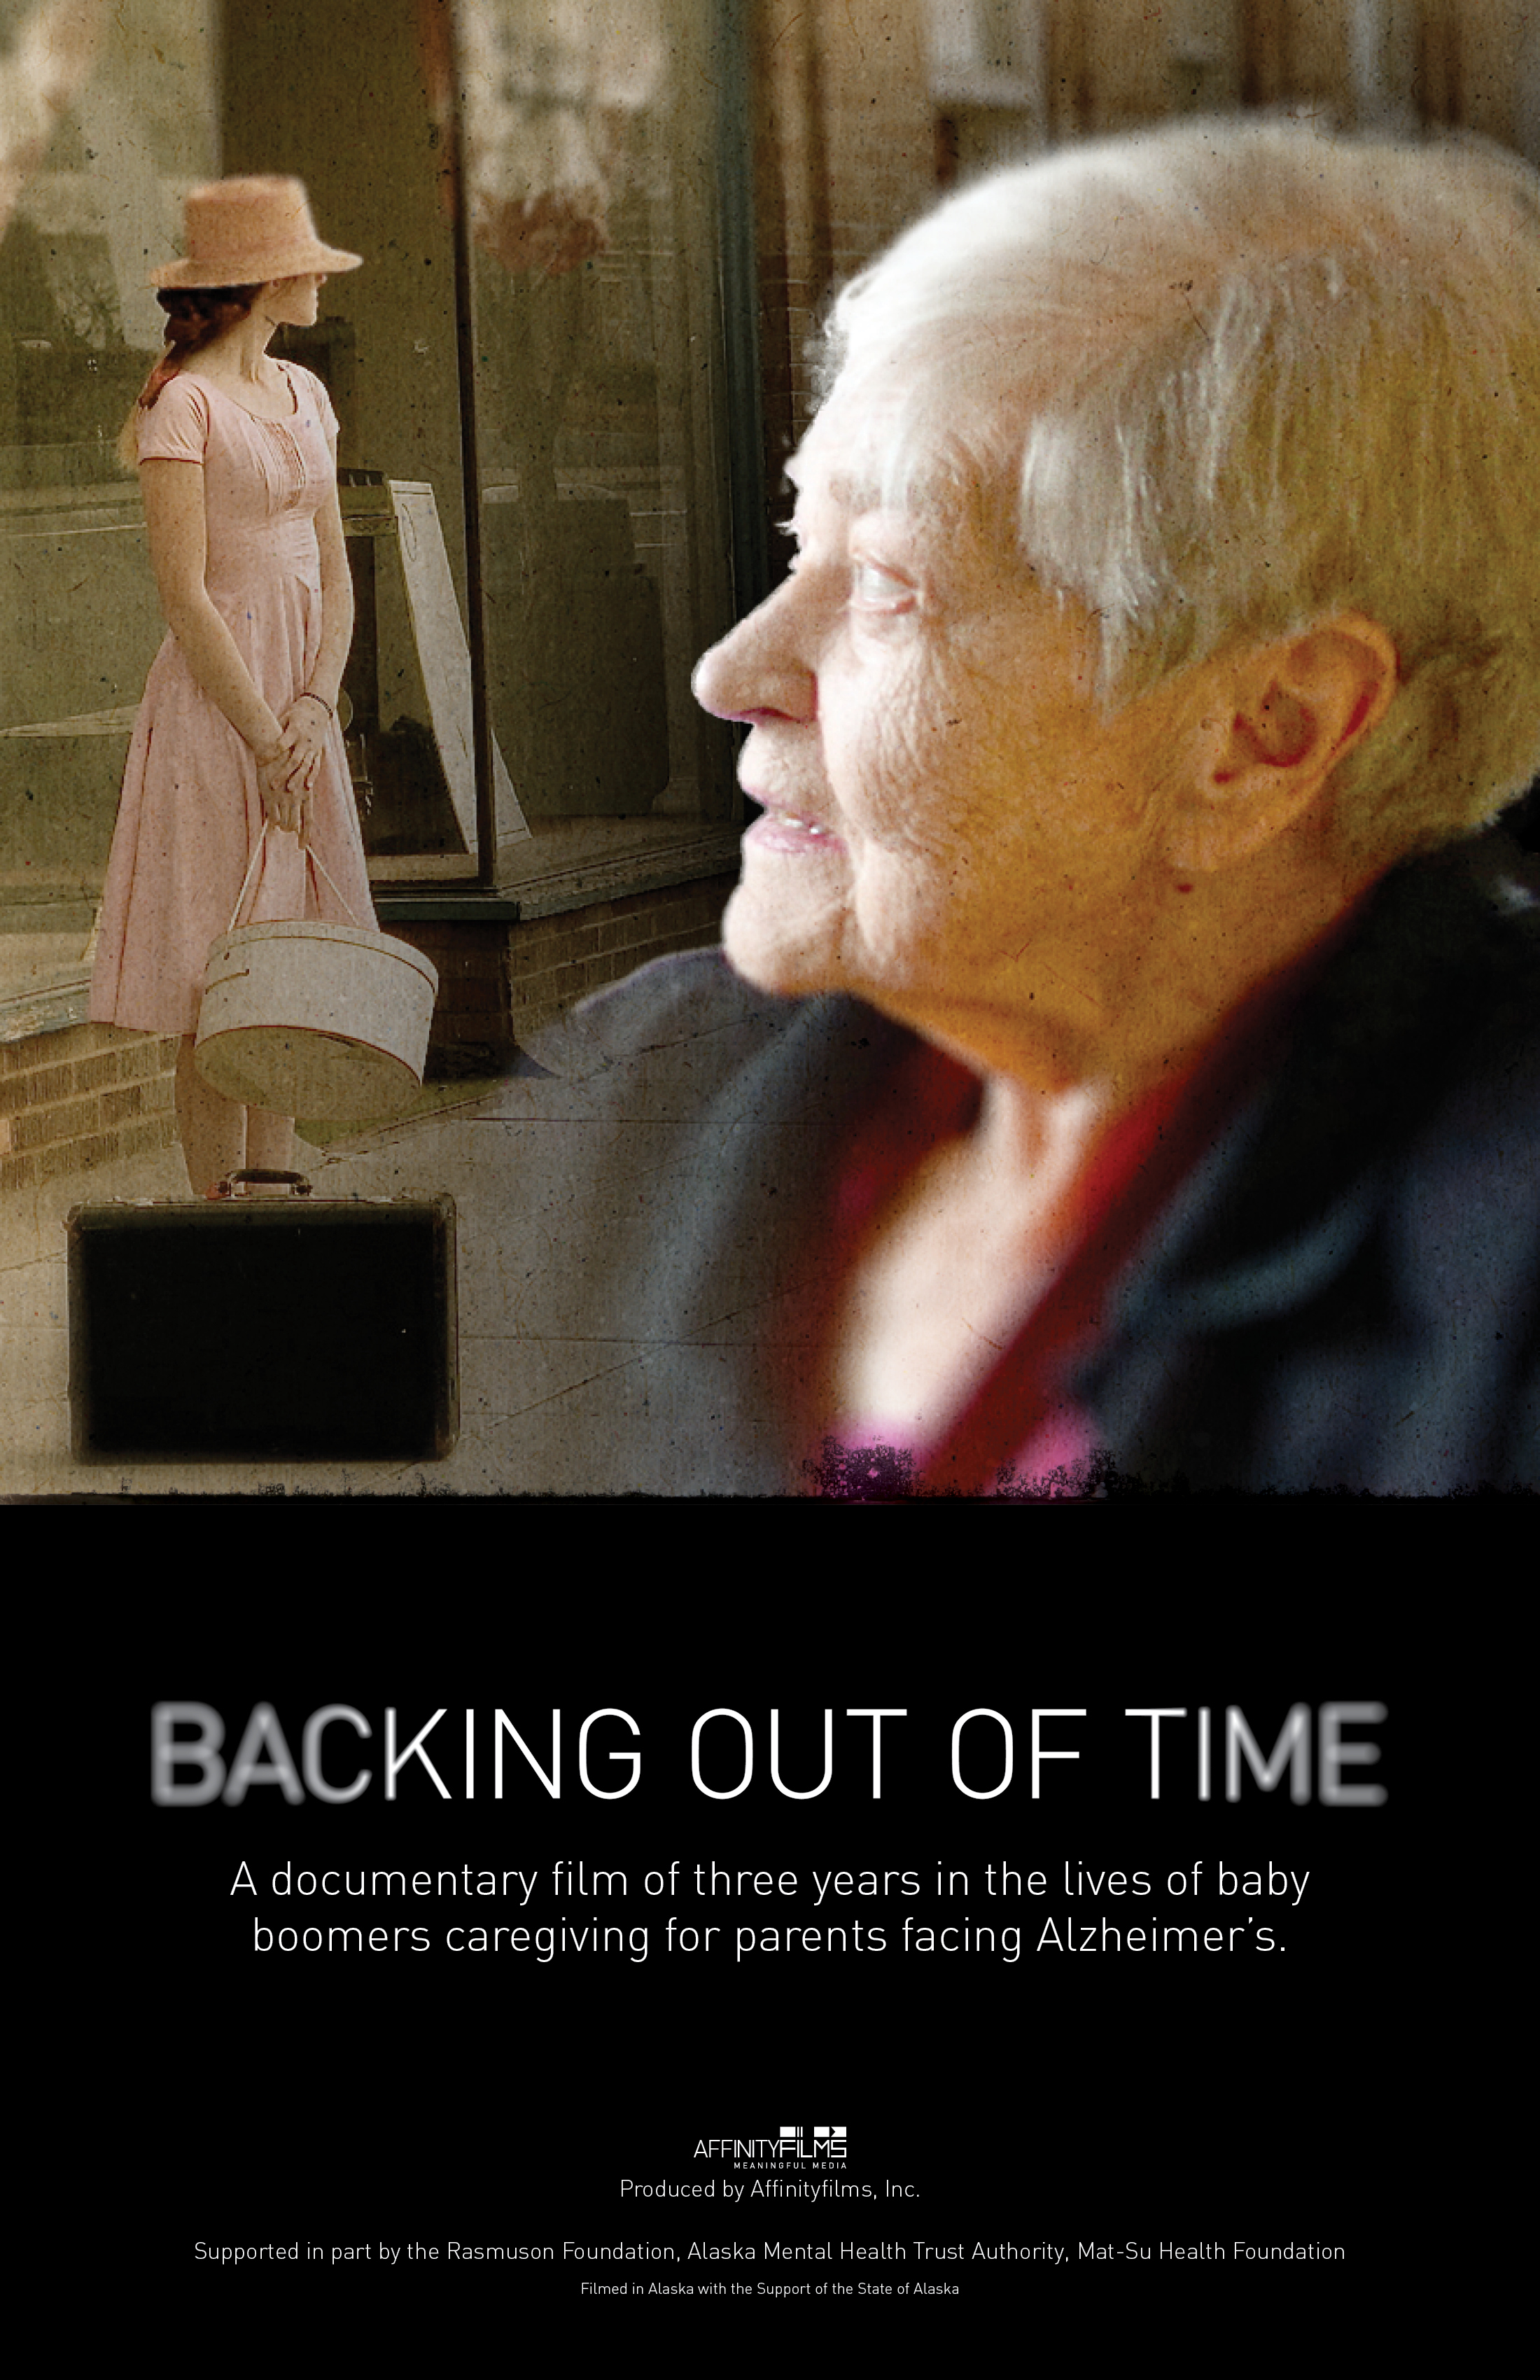 Backing Out of Time documentary on babyboomers caring for parents facing Alzheimer's